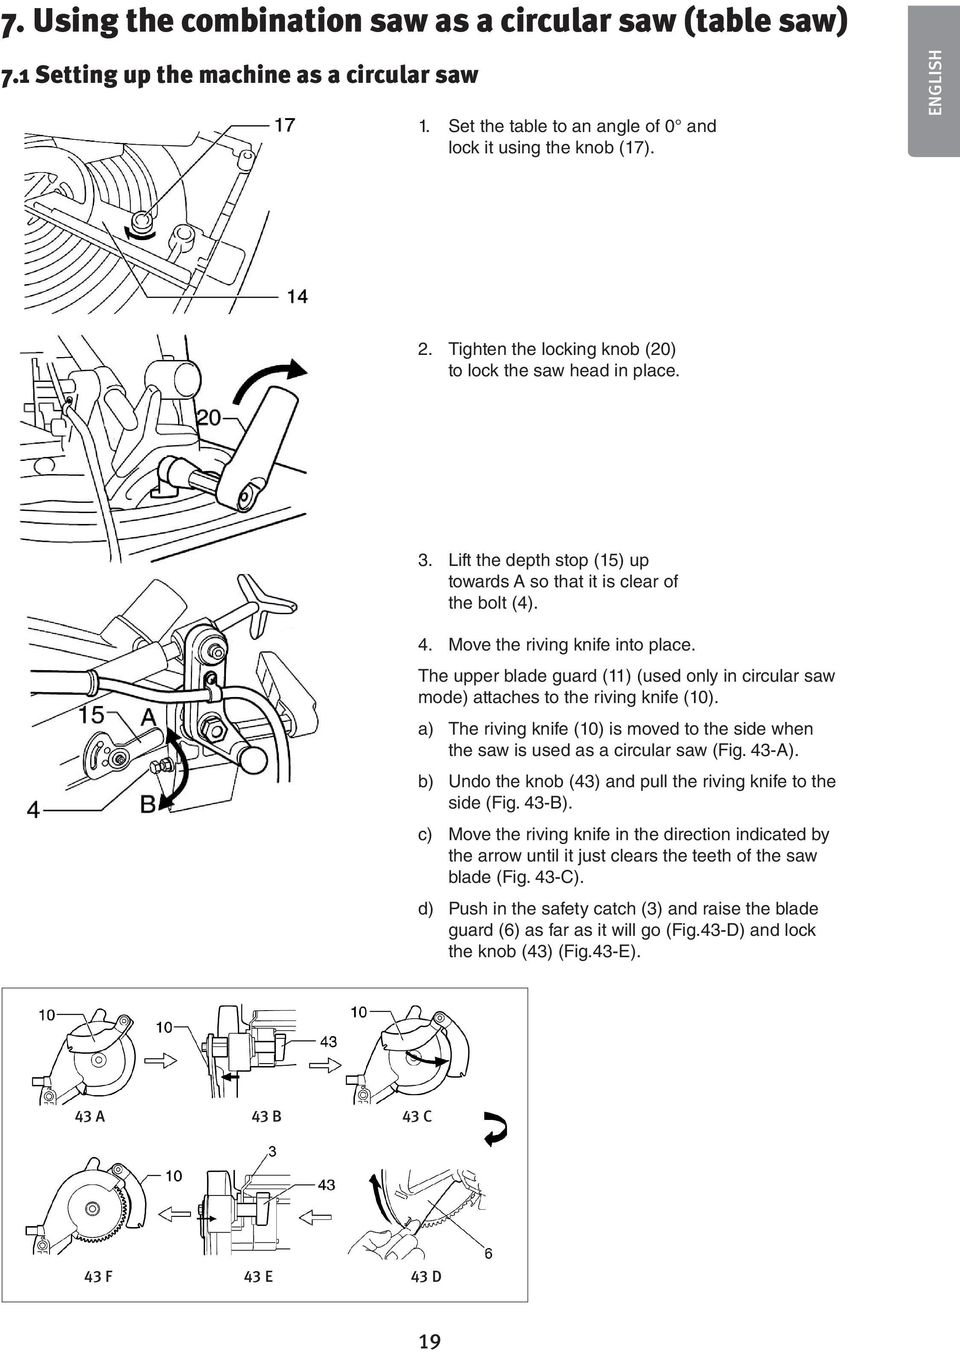 The upper blade guard (11) (used only in circular saw mode) attaches to the riving knife (10). a) The riving knife (10) is moved to the side when the saw is used as a circular saw (Fig. 43-A).